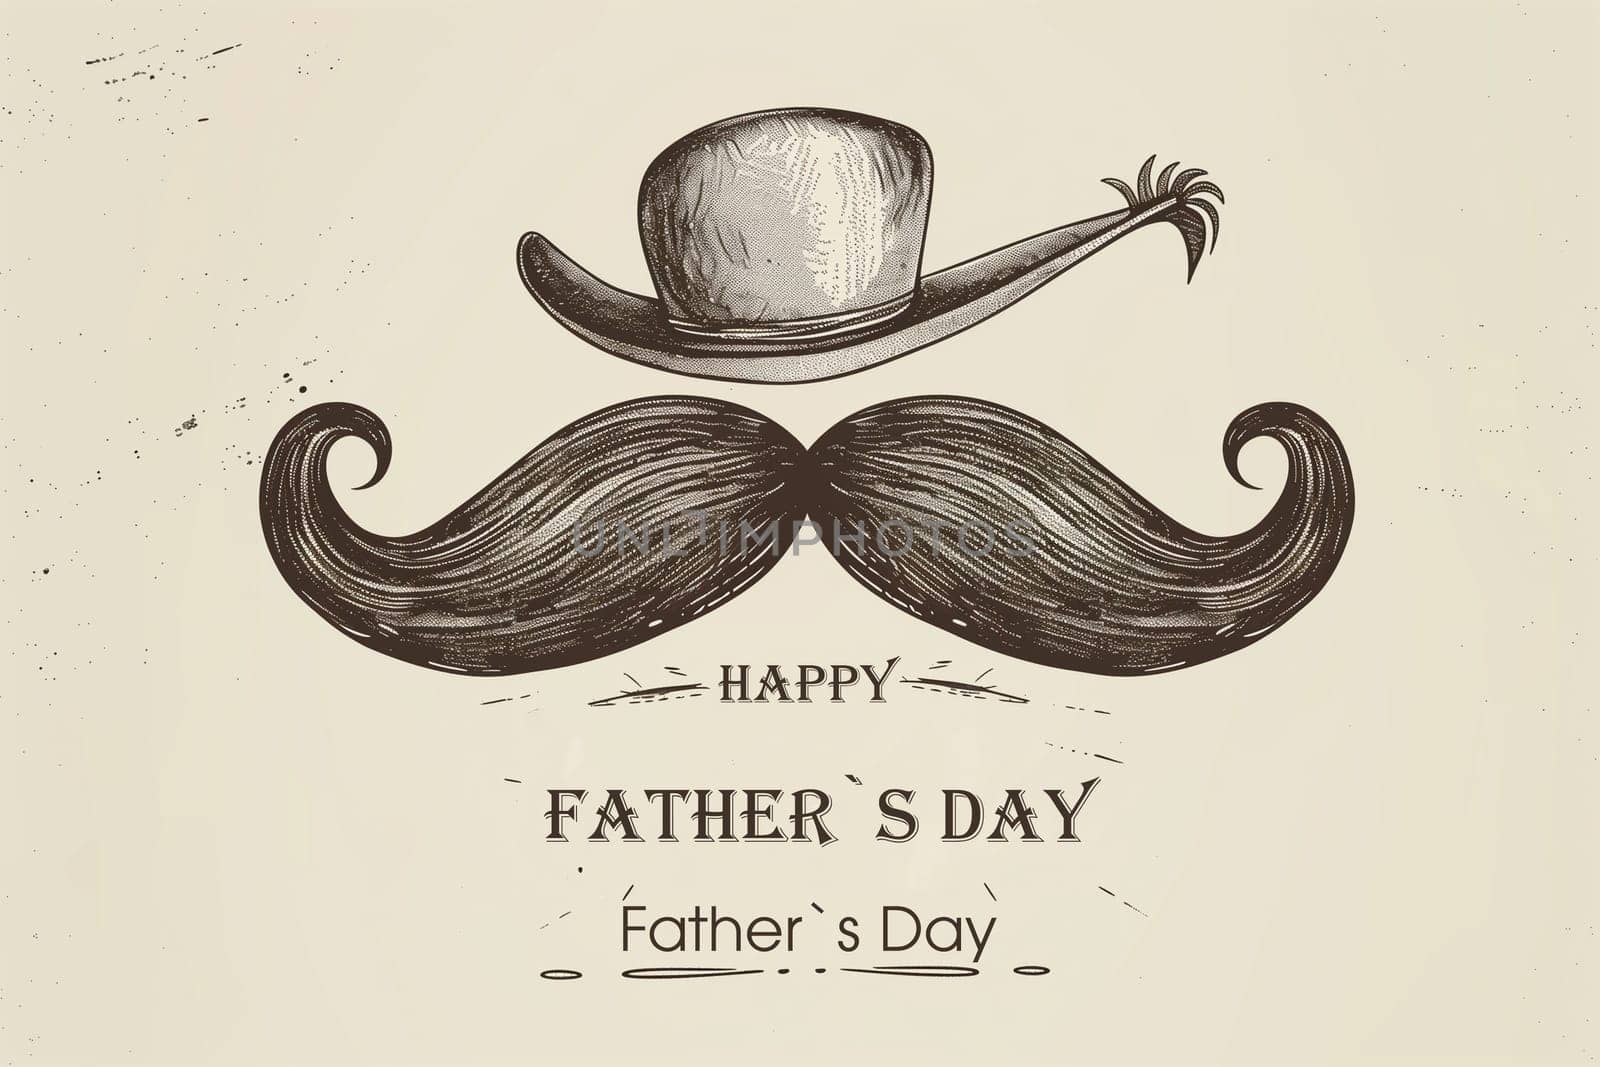 A Fathers Day card featuring a mustache and top hat, symbolizing a classy and sophisticated tribute to fathers.